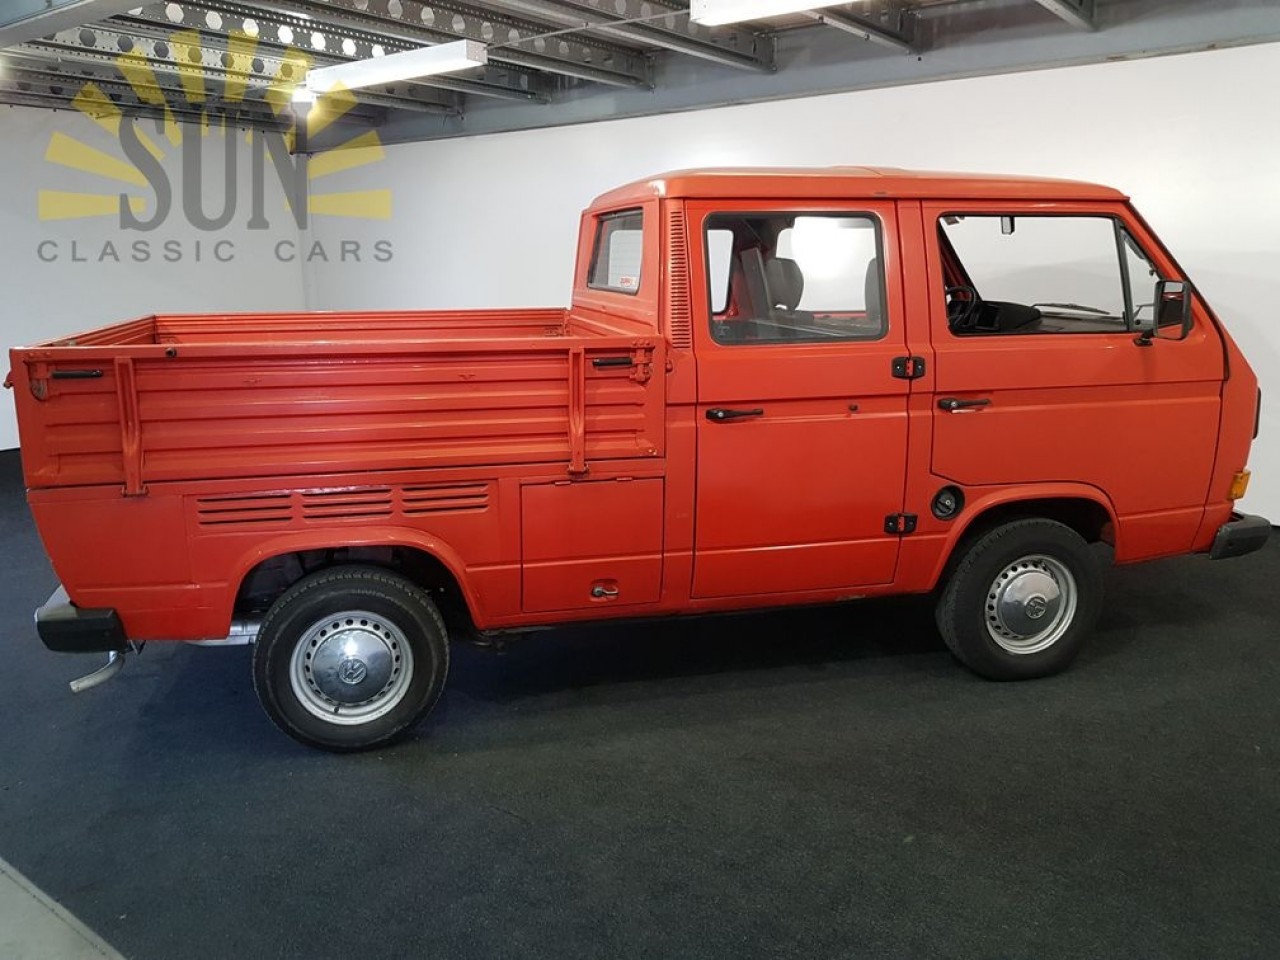 kanker Interactie ouder volkswagen t3 1980 for sale at Sun Classic Cars